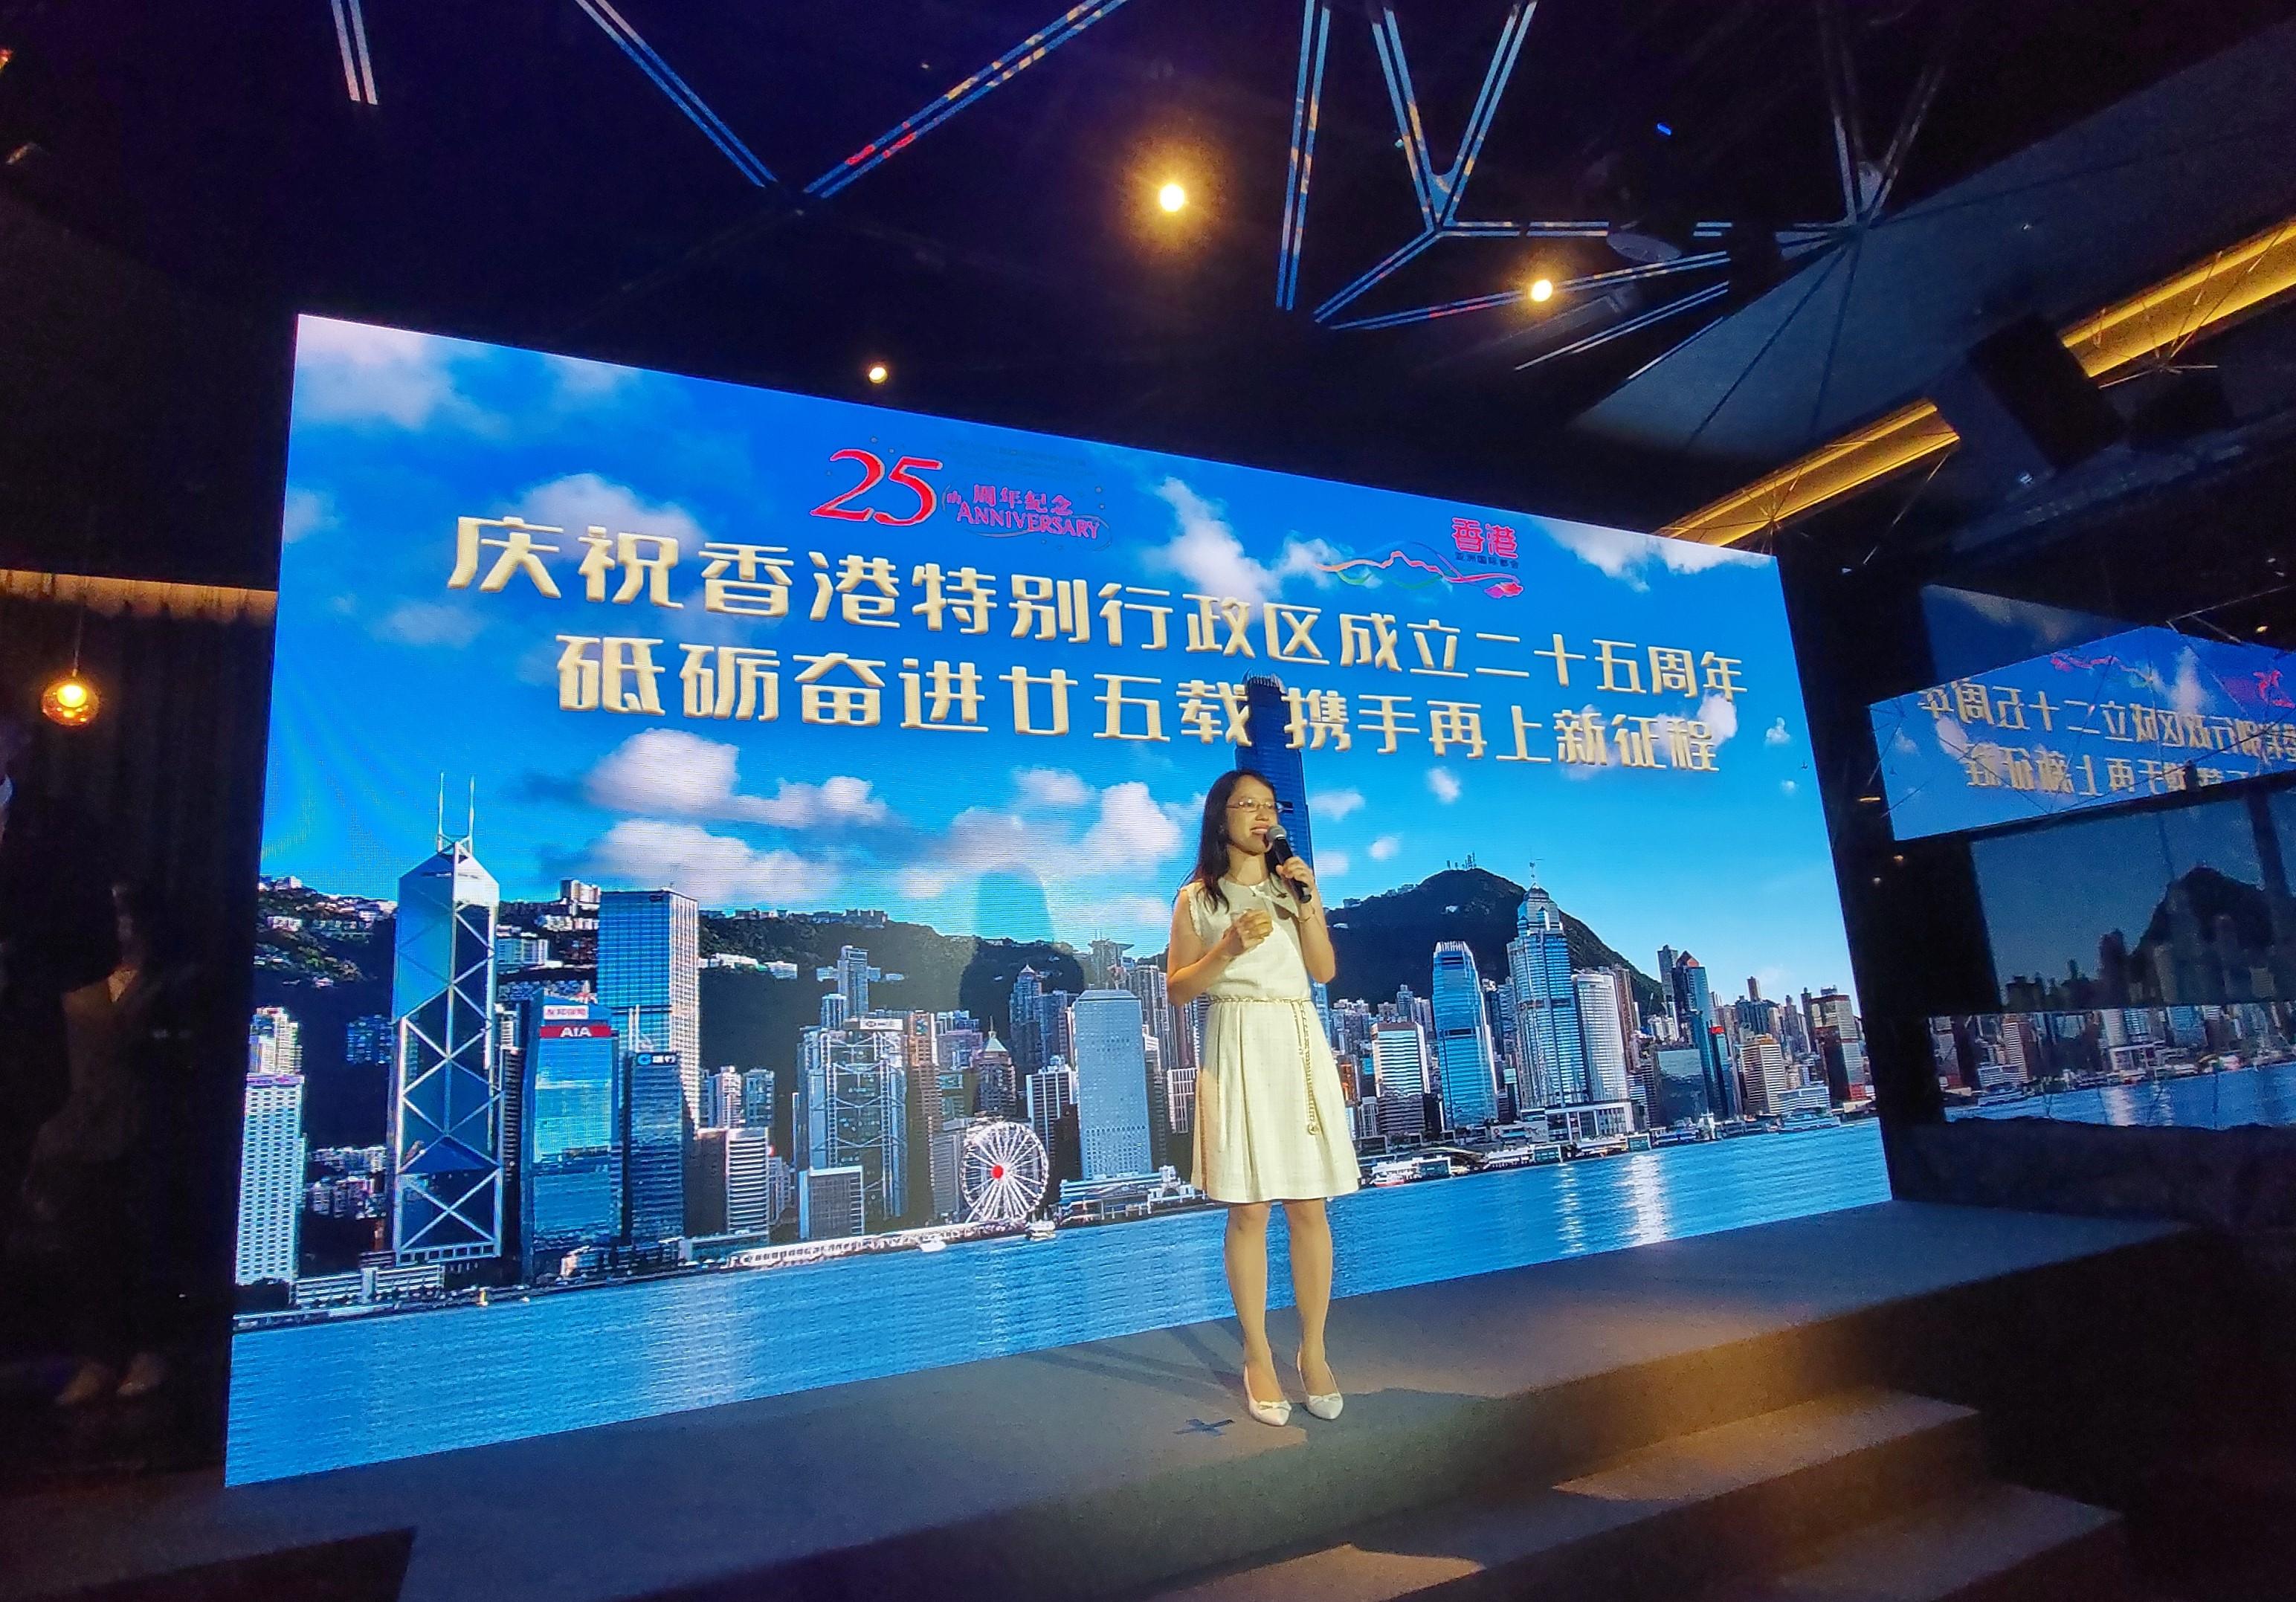 The Hong Kong Economic and Trade Office in Chengdu (CDETO) of the Government of the Hong Kong Special Administrative Region (HKSAR) has been holding a series of celebration activities since June to mark the 25th anniversary of the establishment of the HKSAR. Photo shows the Director of the CDETO, Miss Li Wan-in, speaking at a reception in Chengdu on July 4.